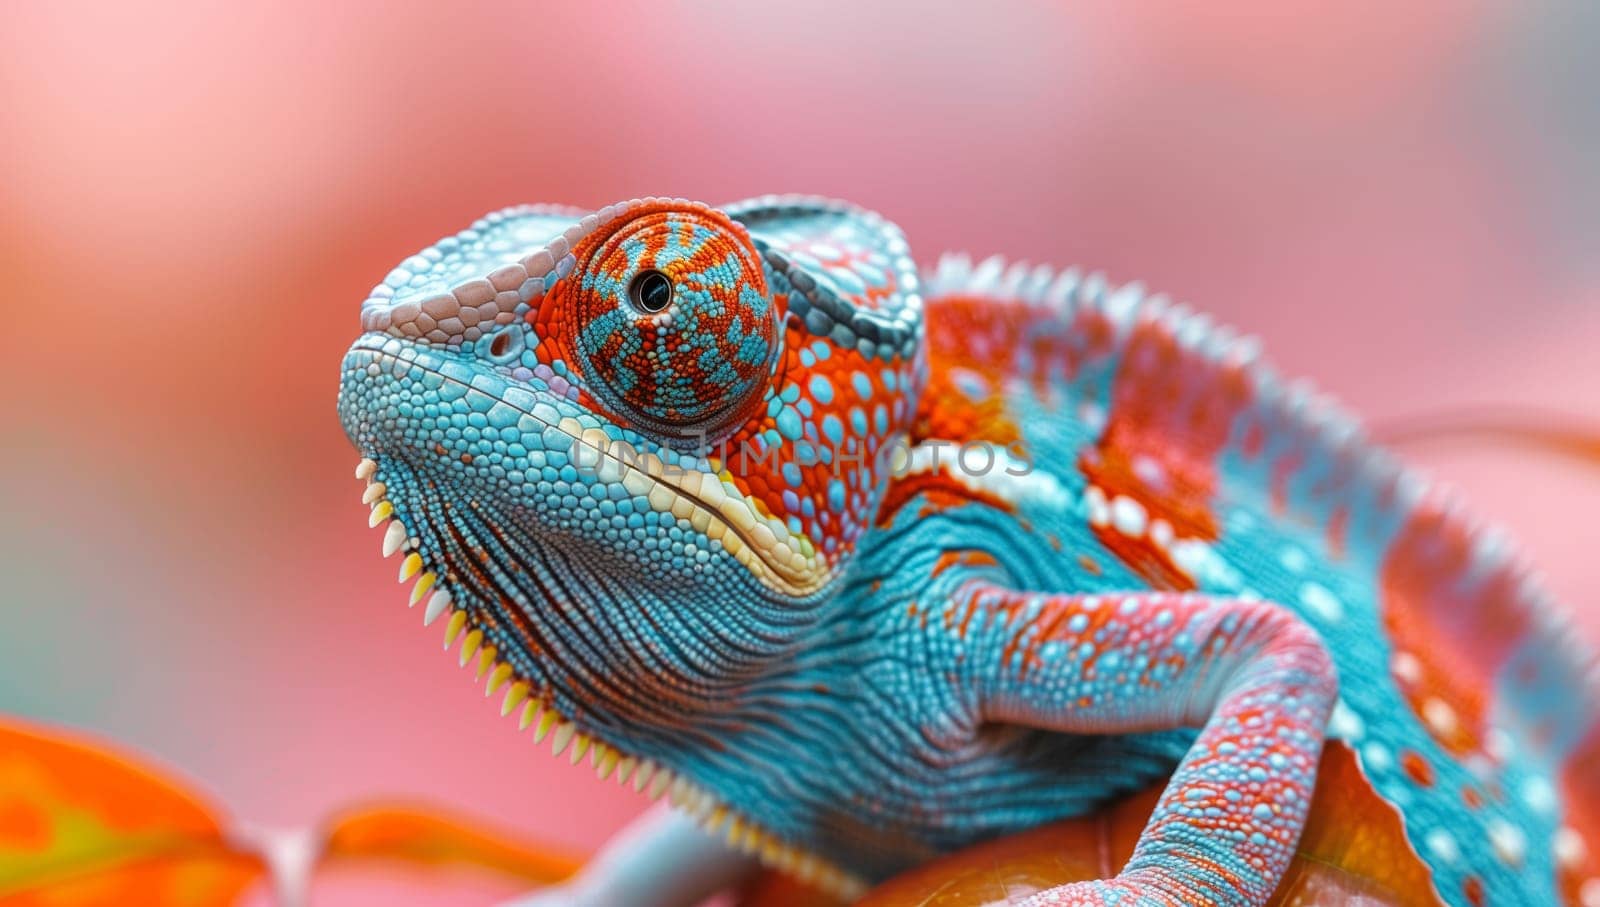 A closeup of a vibrant electric blue chameleon, a scaled reptile, perched on a leaf. The macro photography captures the lizards intricate details in this creative art piece showcasing wildlife